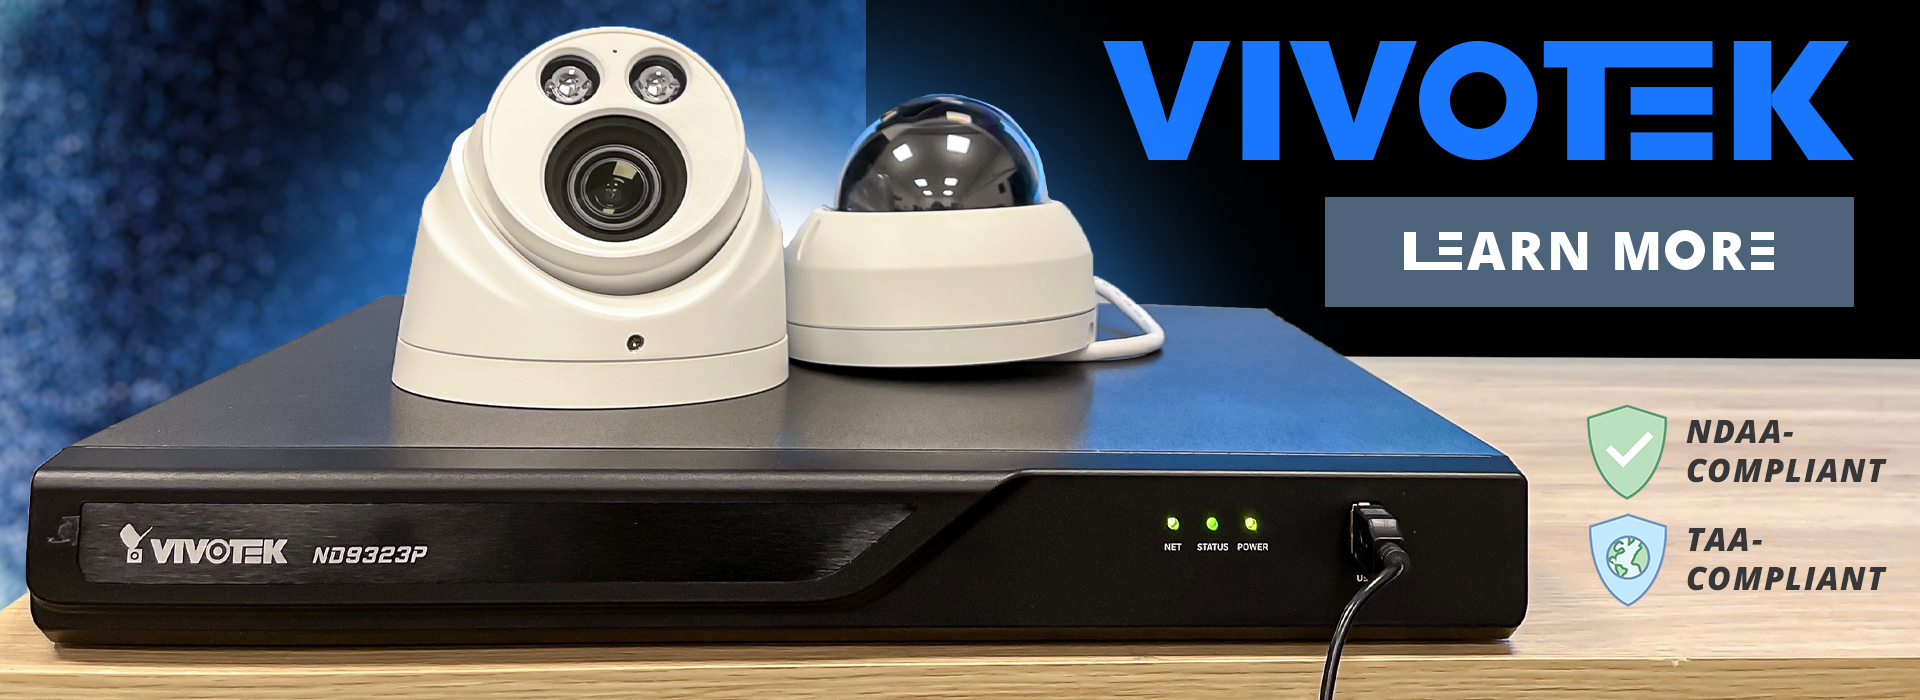 Click to learn more about our newest product line, Vivotek